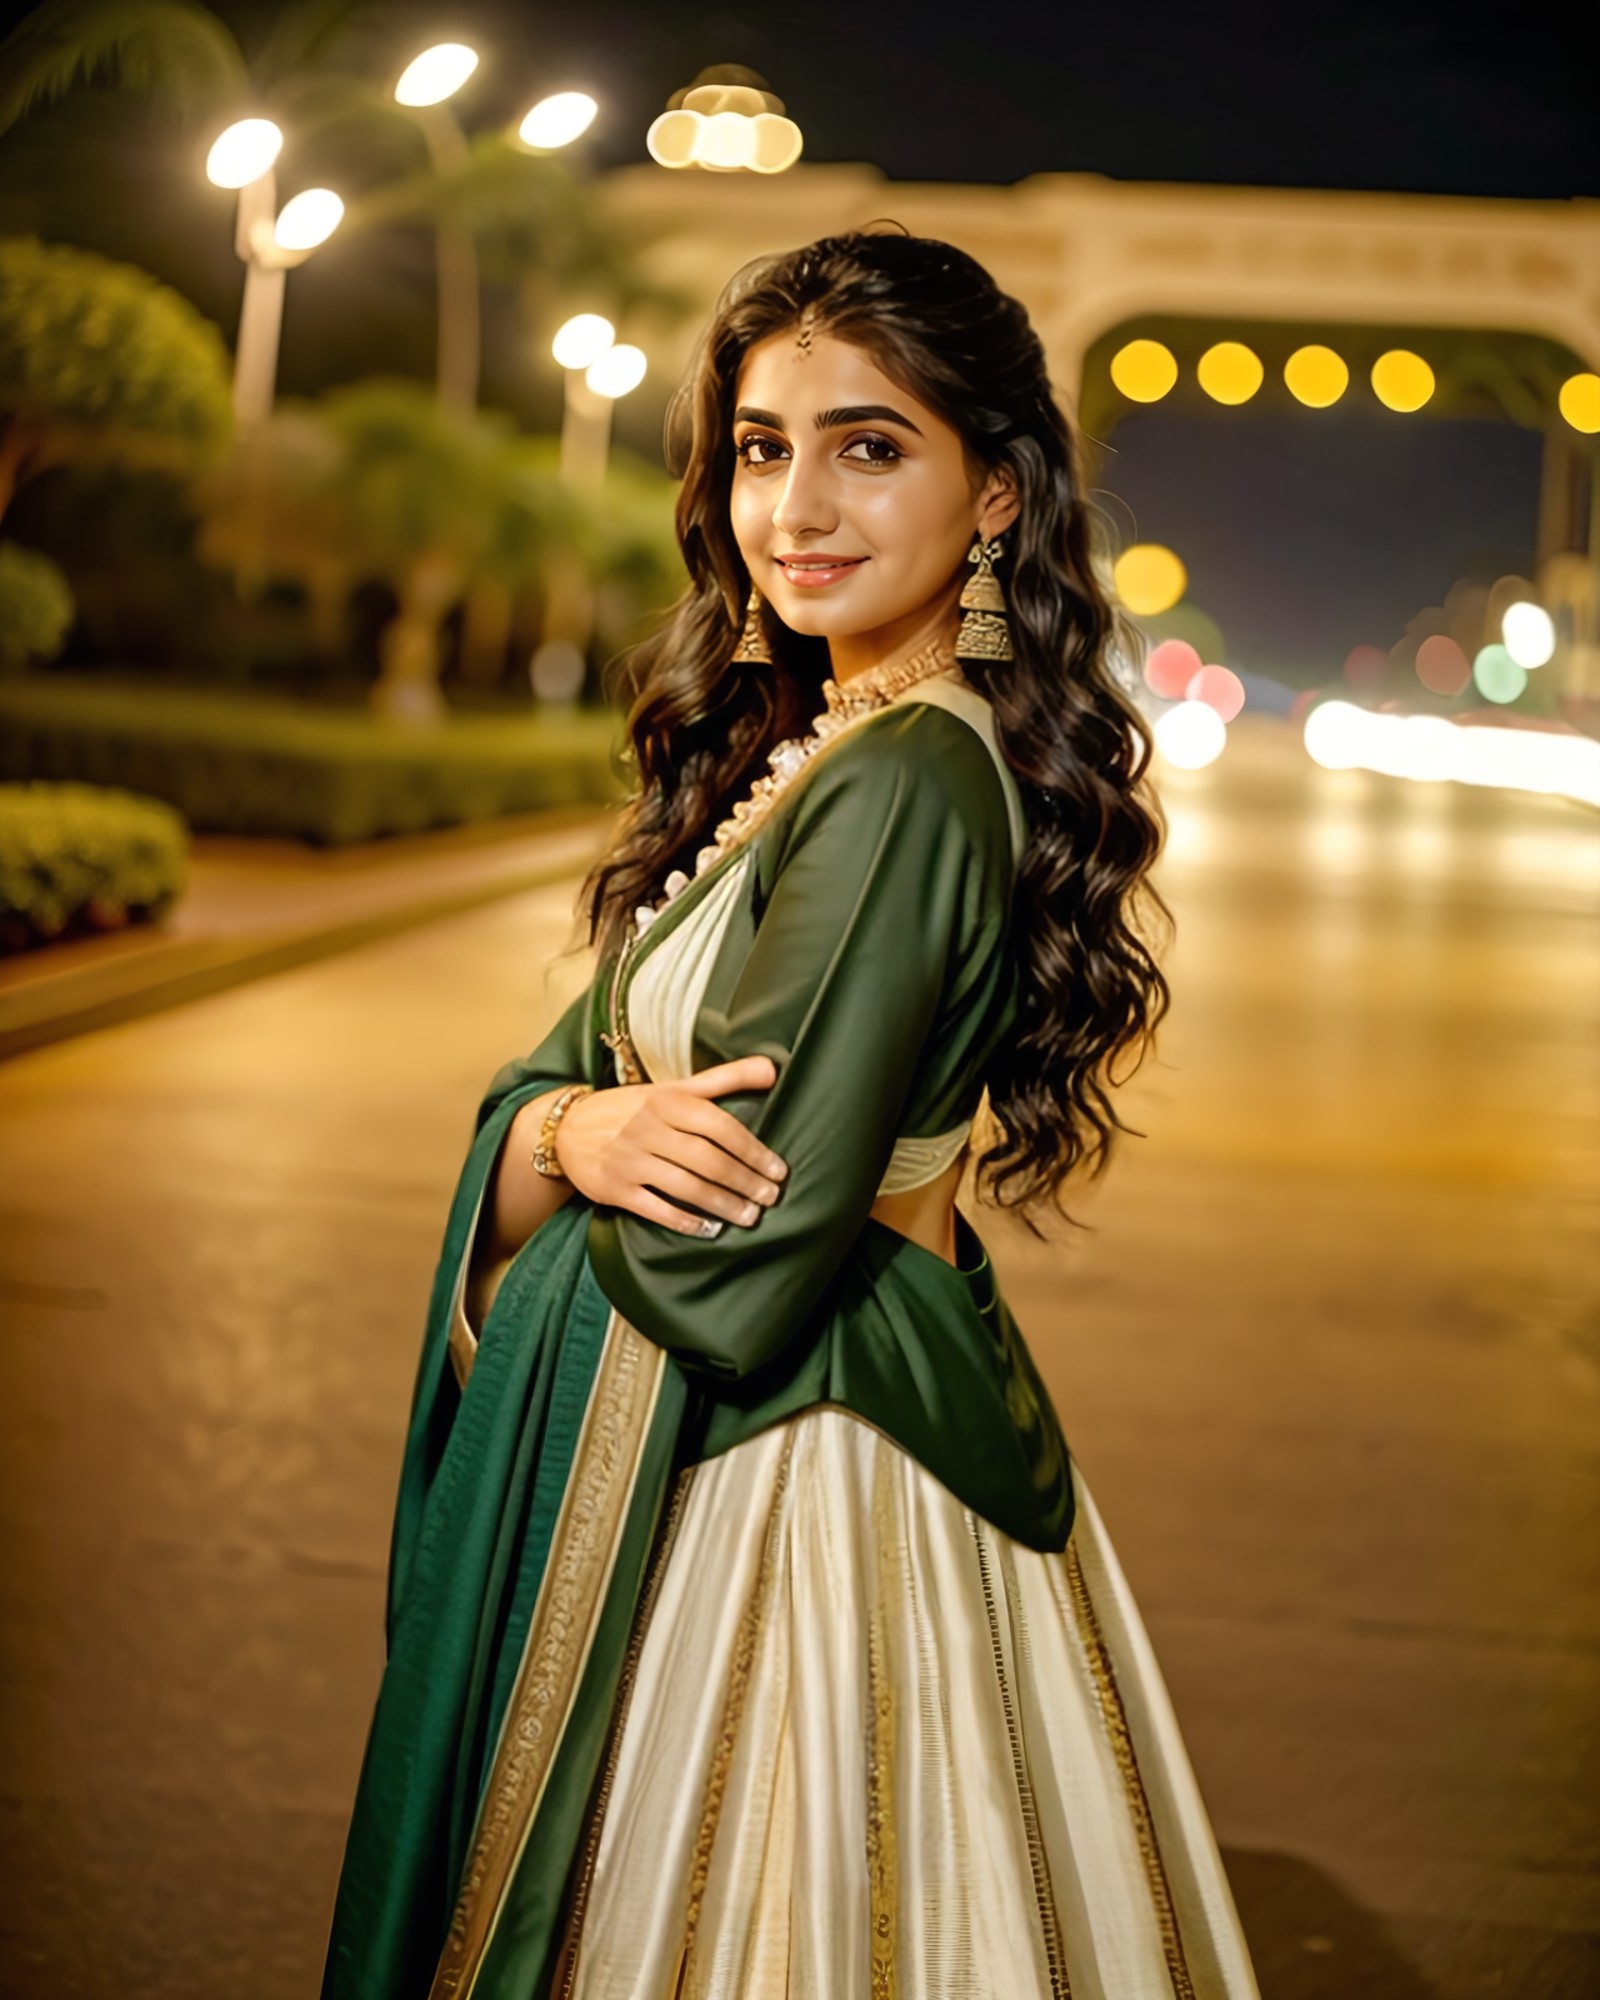 photo of a vdka woman, wearing conservative Olive Indian clothing, solo, smiling, night time, city lights  in background b...